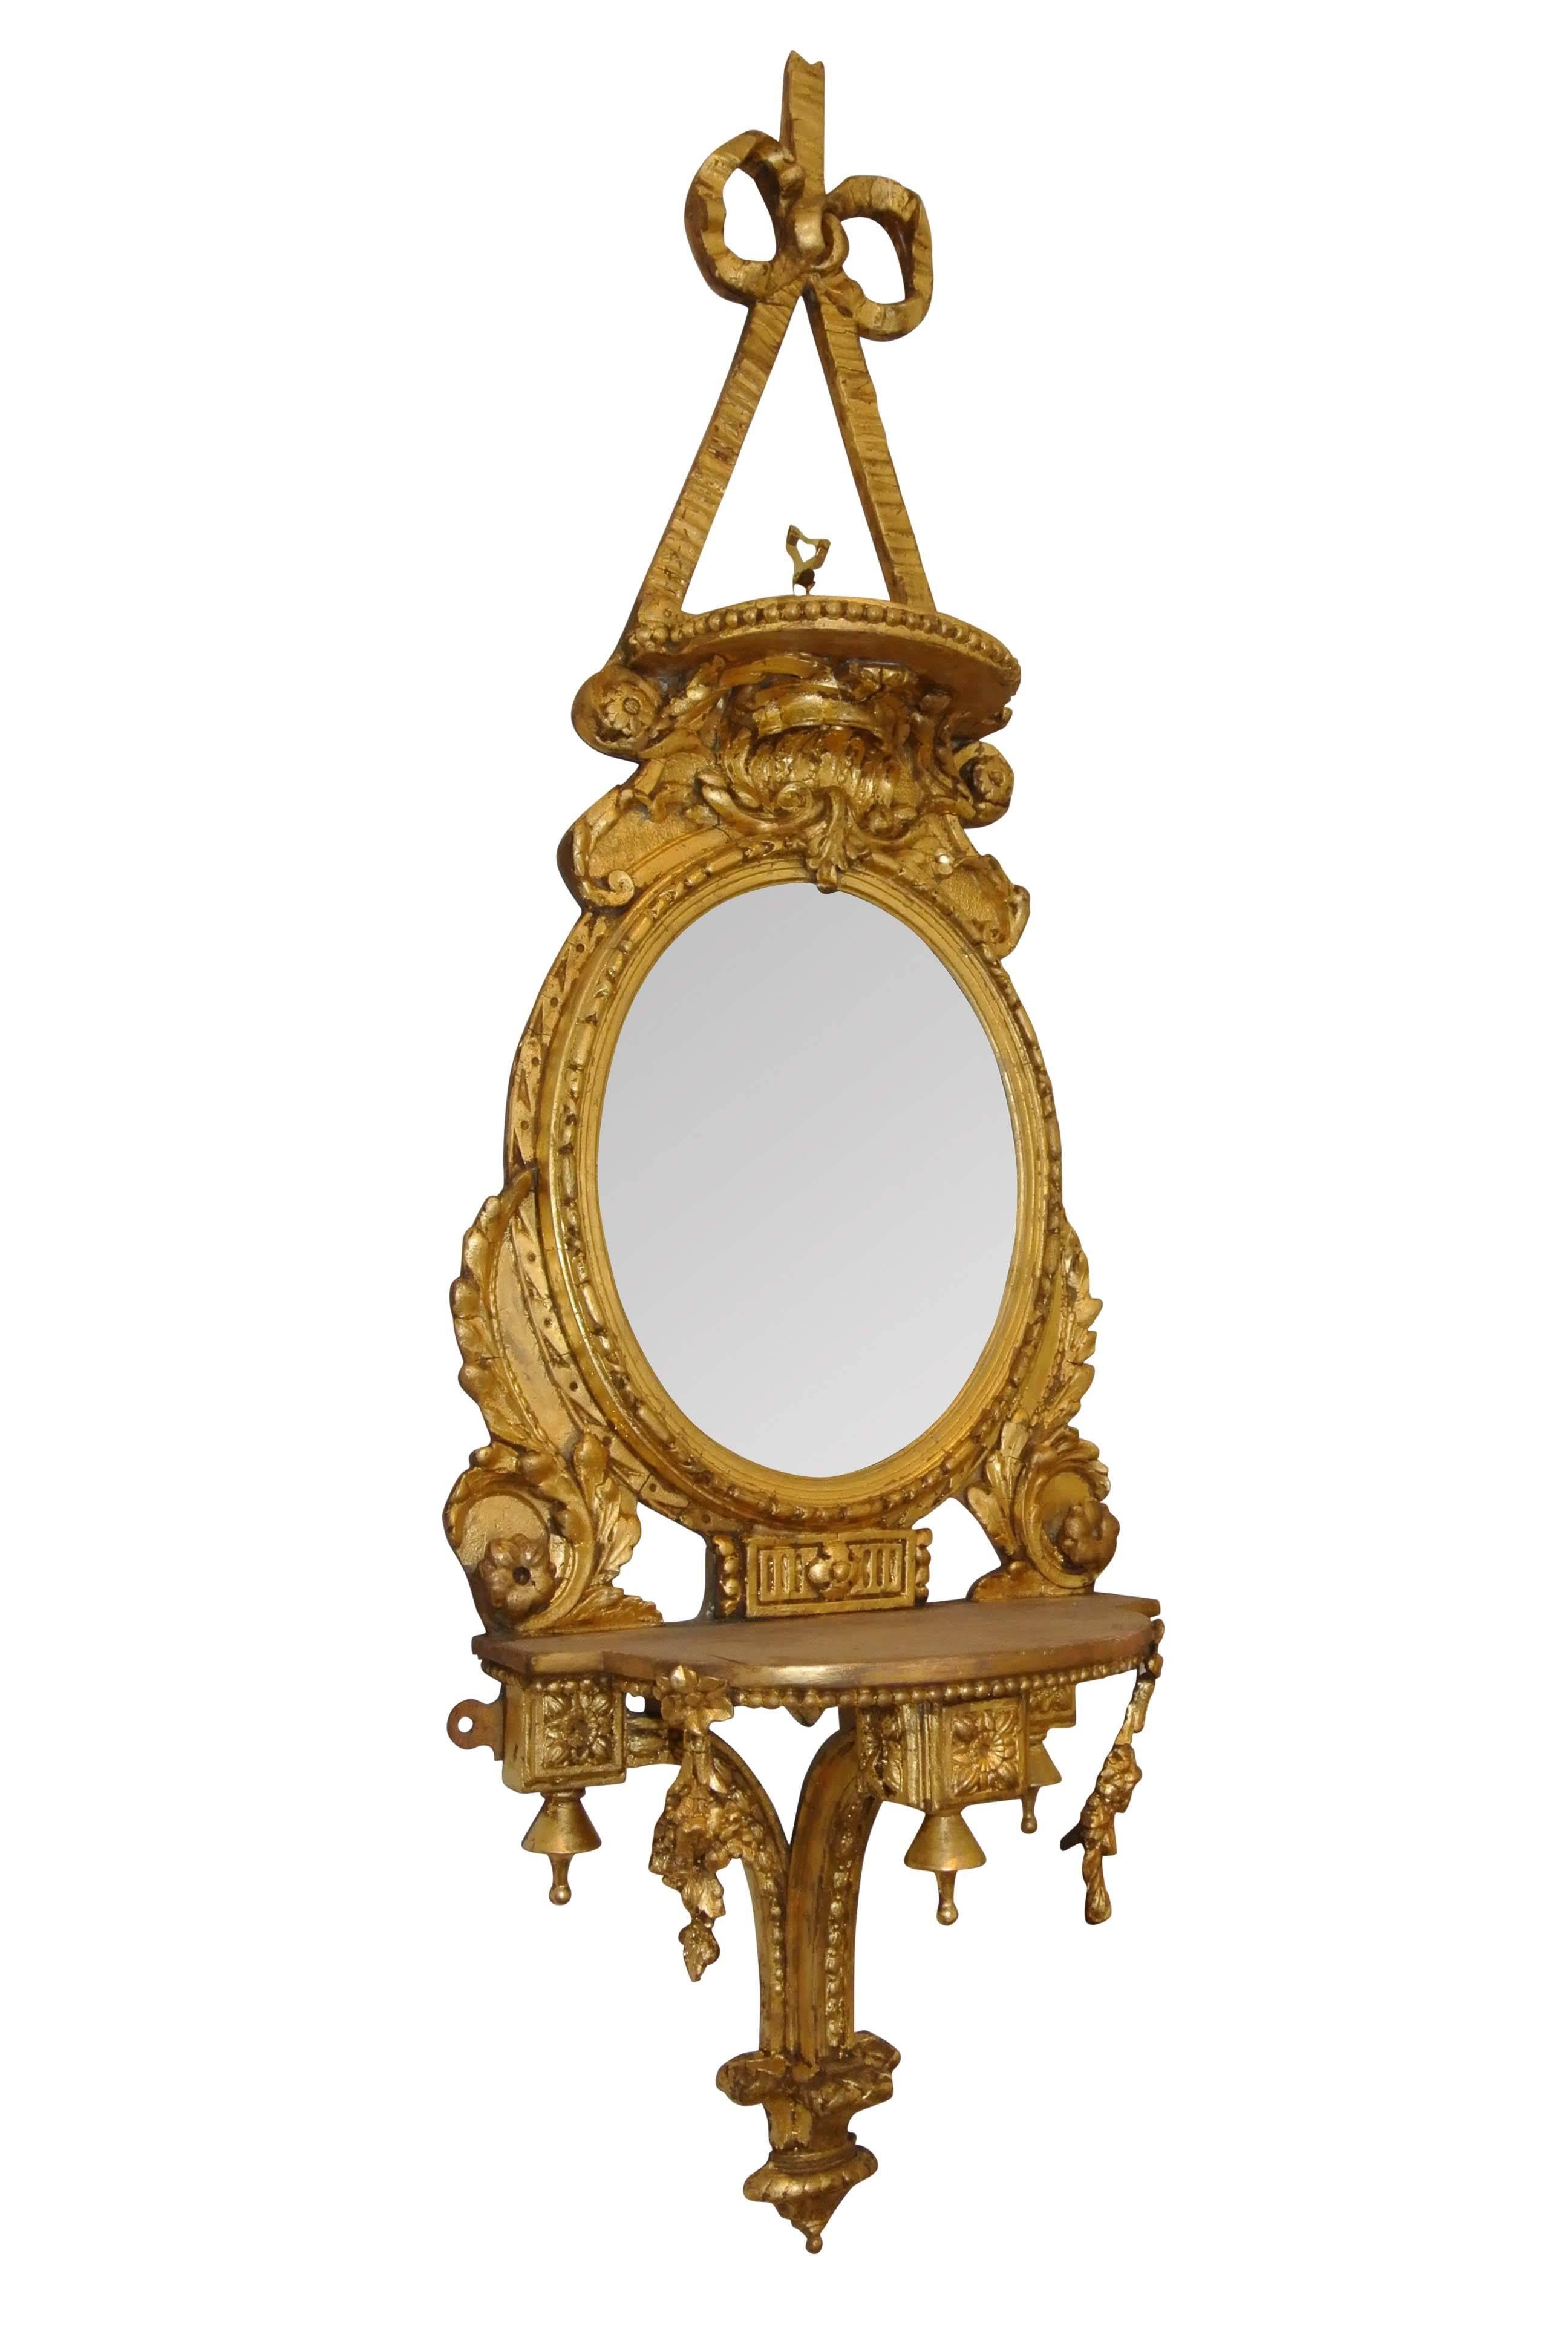 Pair of mid-19th century decorative gilt mirror sconces with original mirror plates, in very good condition.